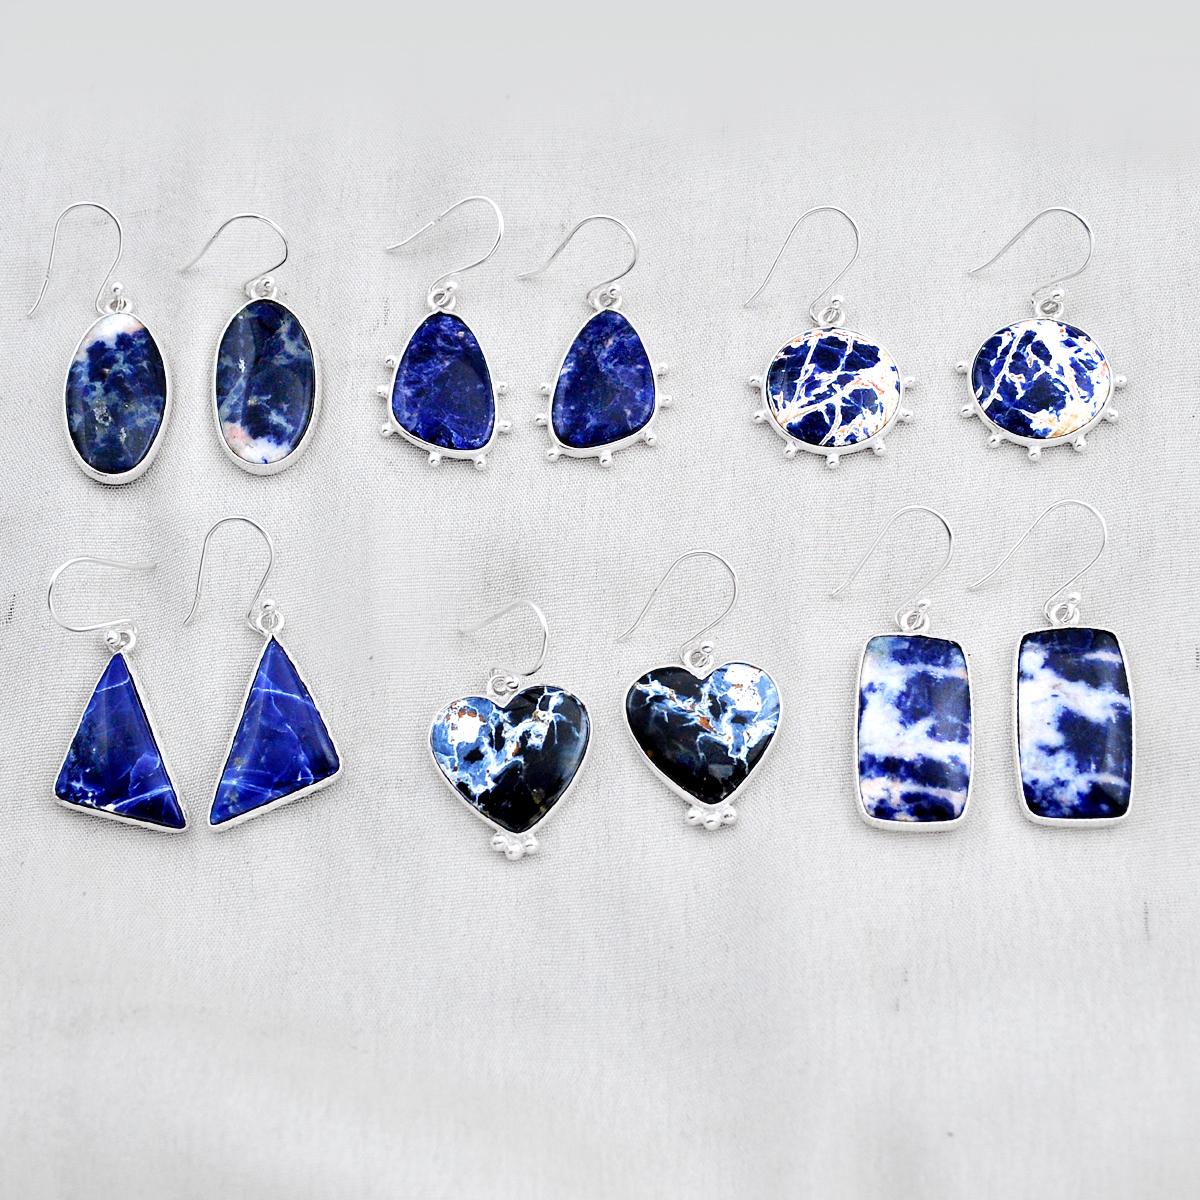 Hand-Carved-Wholesale-Lot-Of-6-Natural-Blue-Sodalite-925-Silver-Earrings-W4117